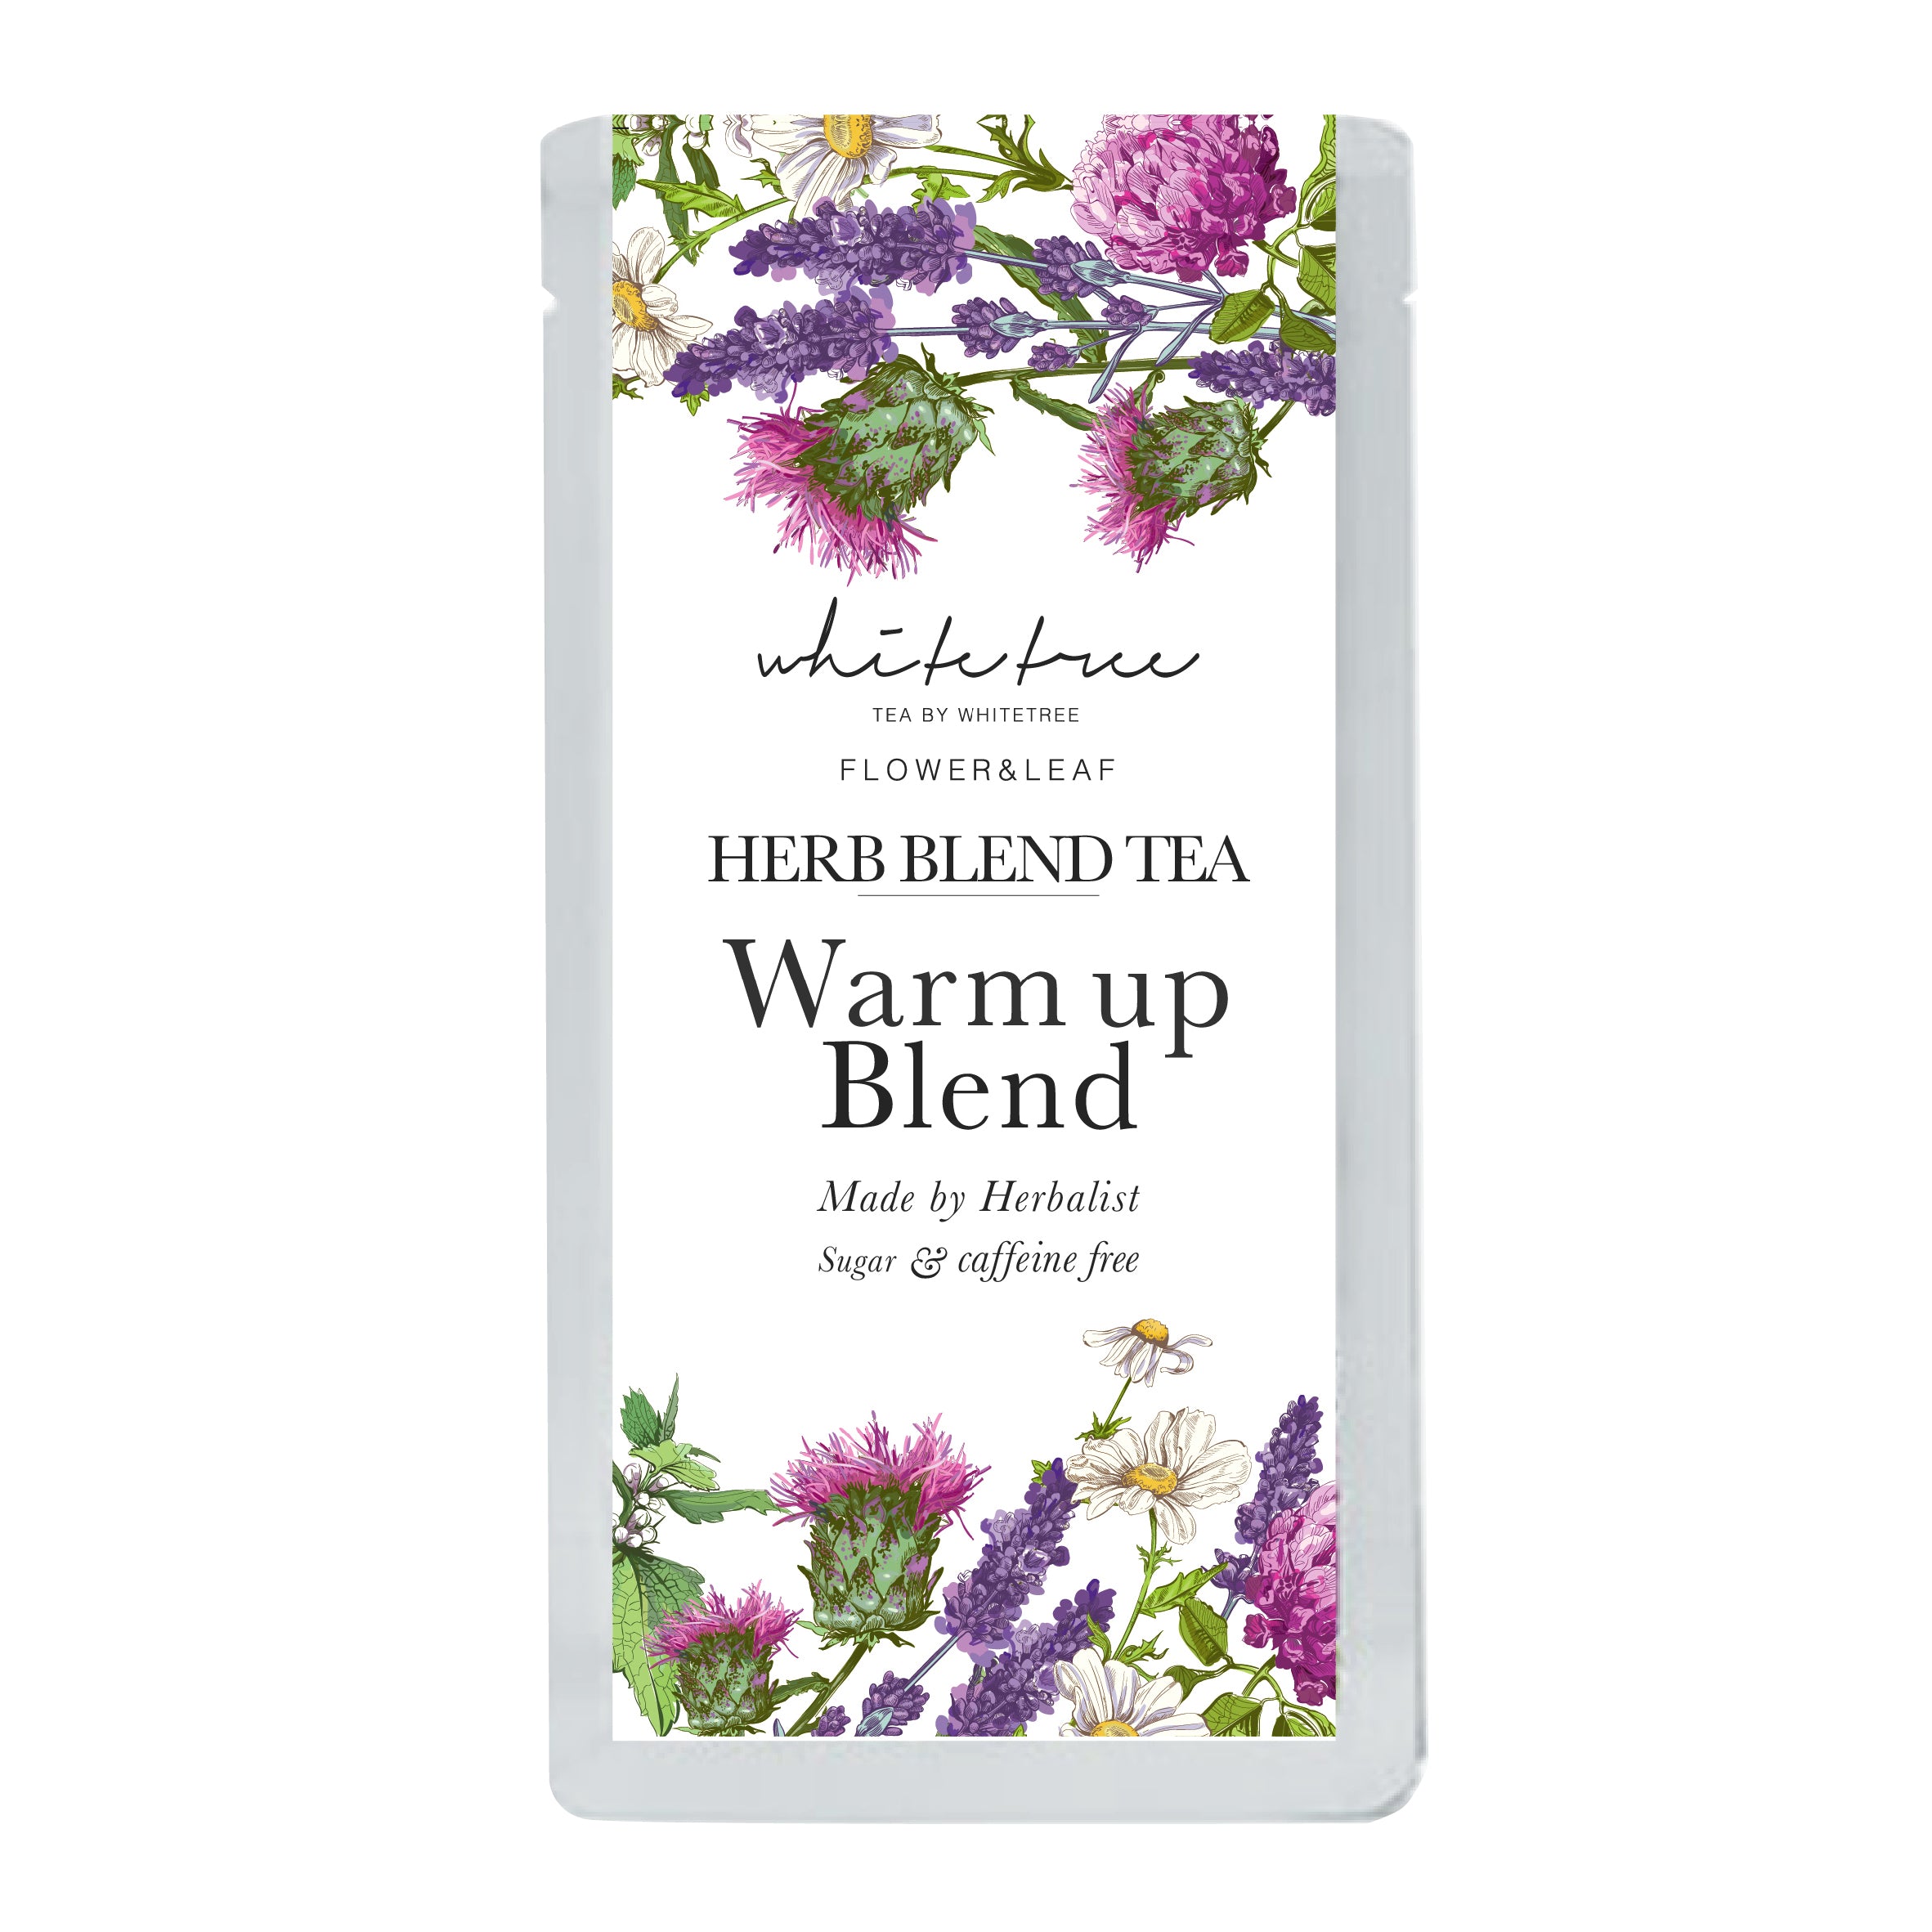 THE WARM UP BLEND